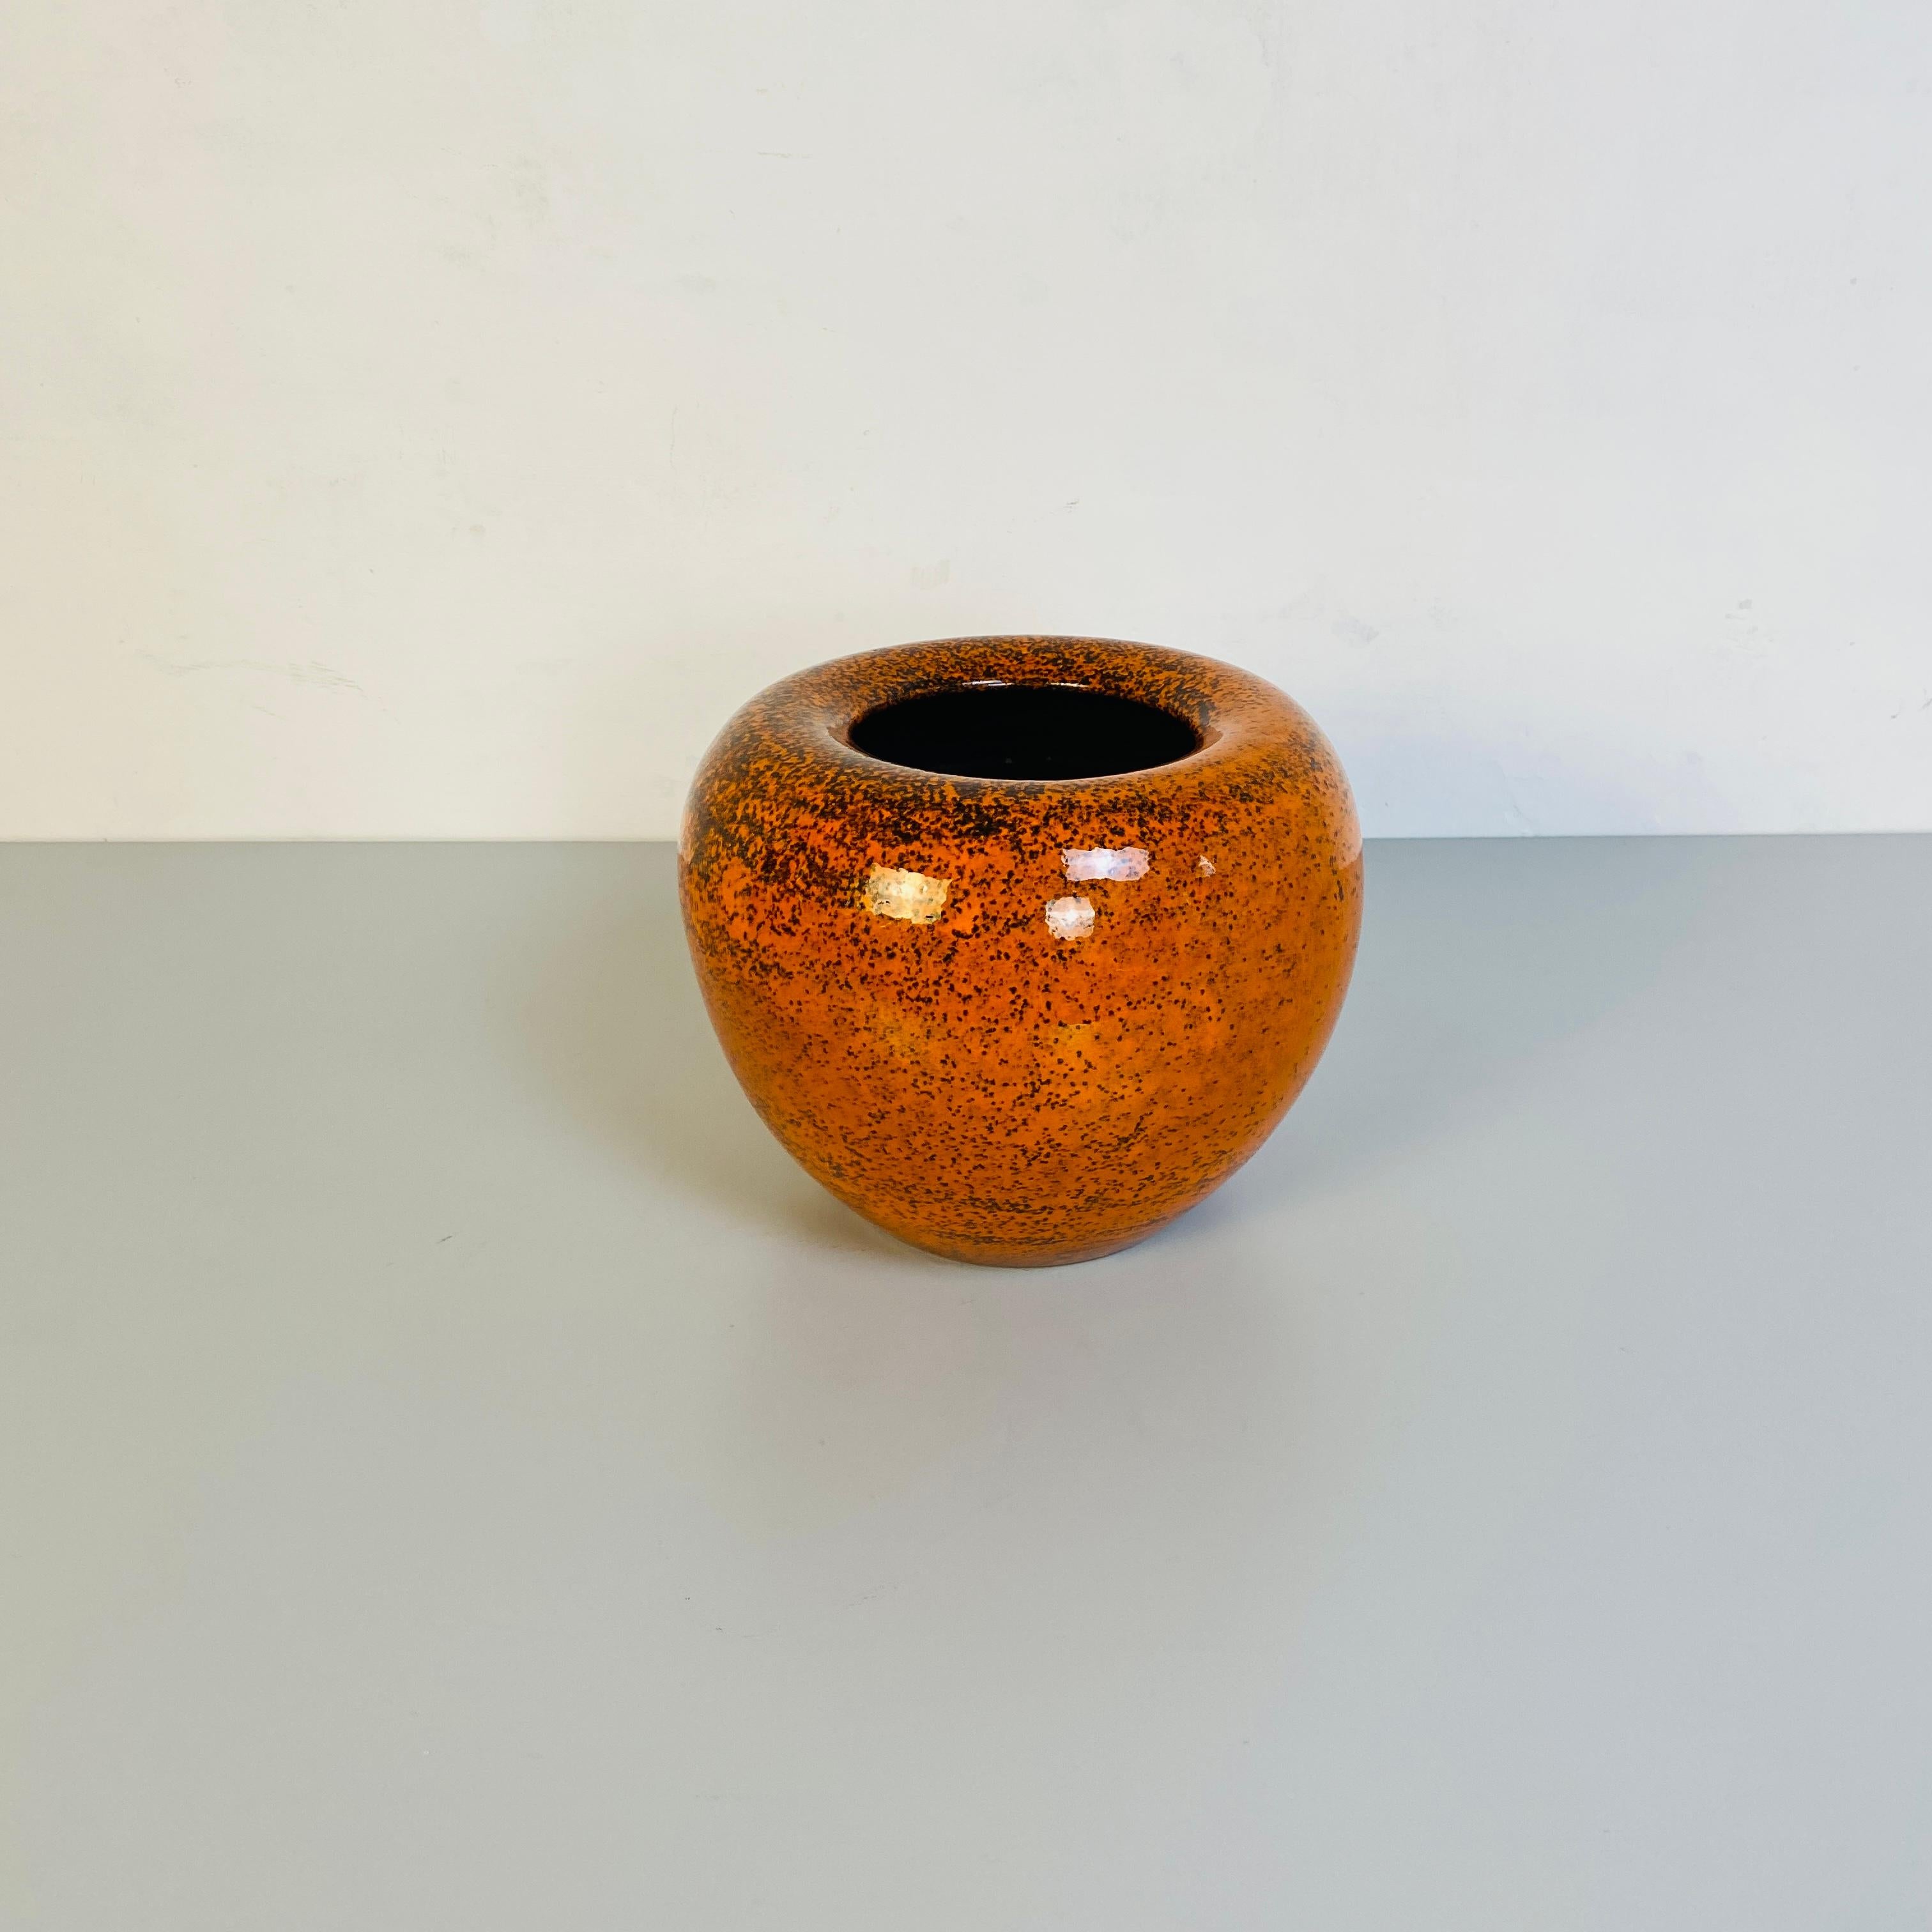 Italian mid-century modern orange ceramic vase, 1960s
Round-shaped vase in orange glazed ceramic and abstract brown decorations.

Very good condition

Measures in cm 25 D x 20 H.